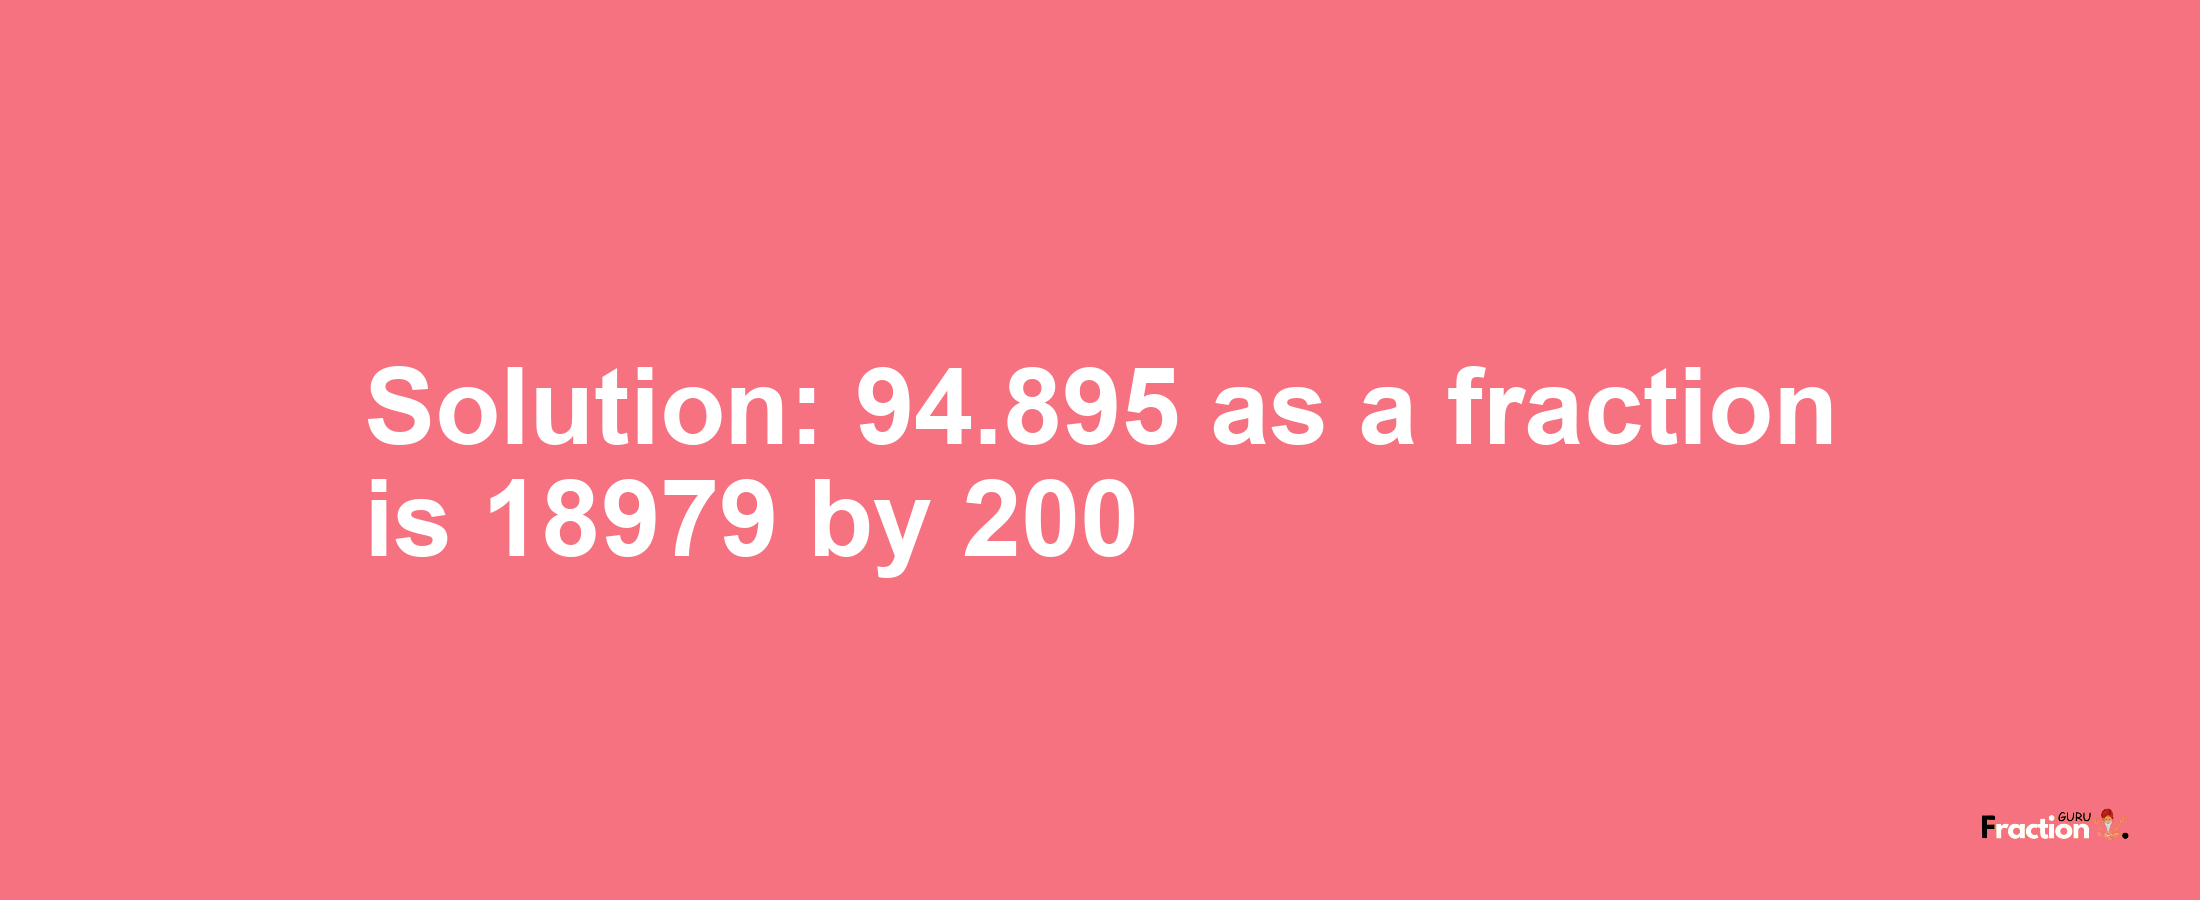 Solution:94.895 as a fraction is 18979/200